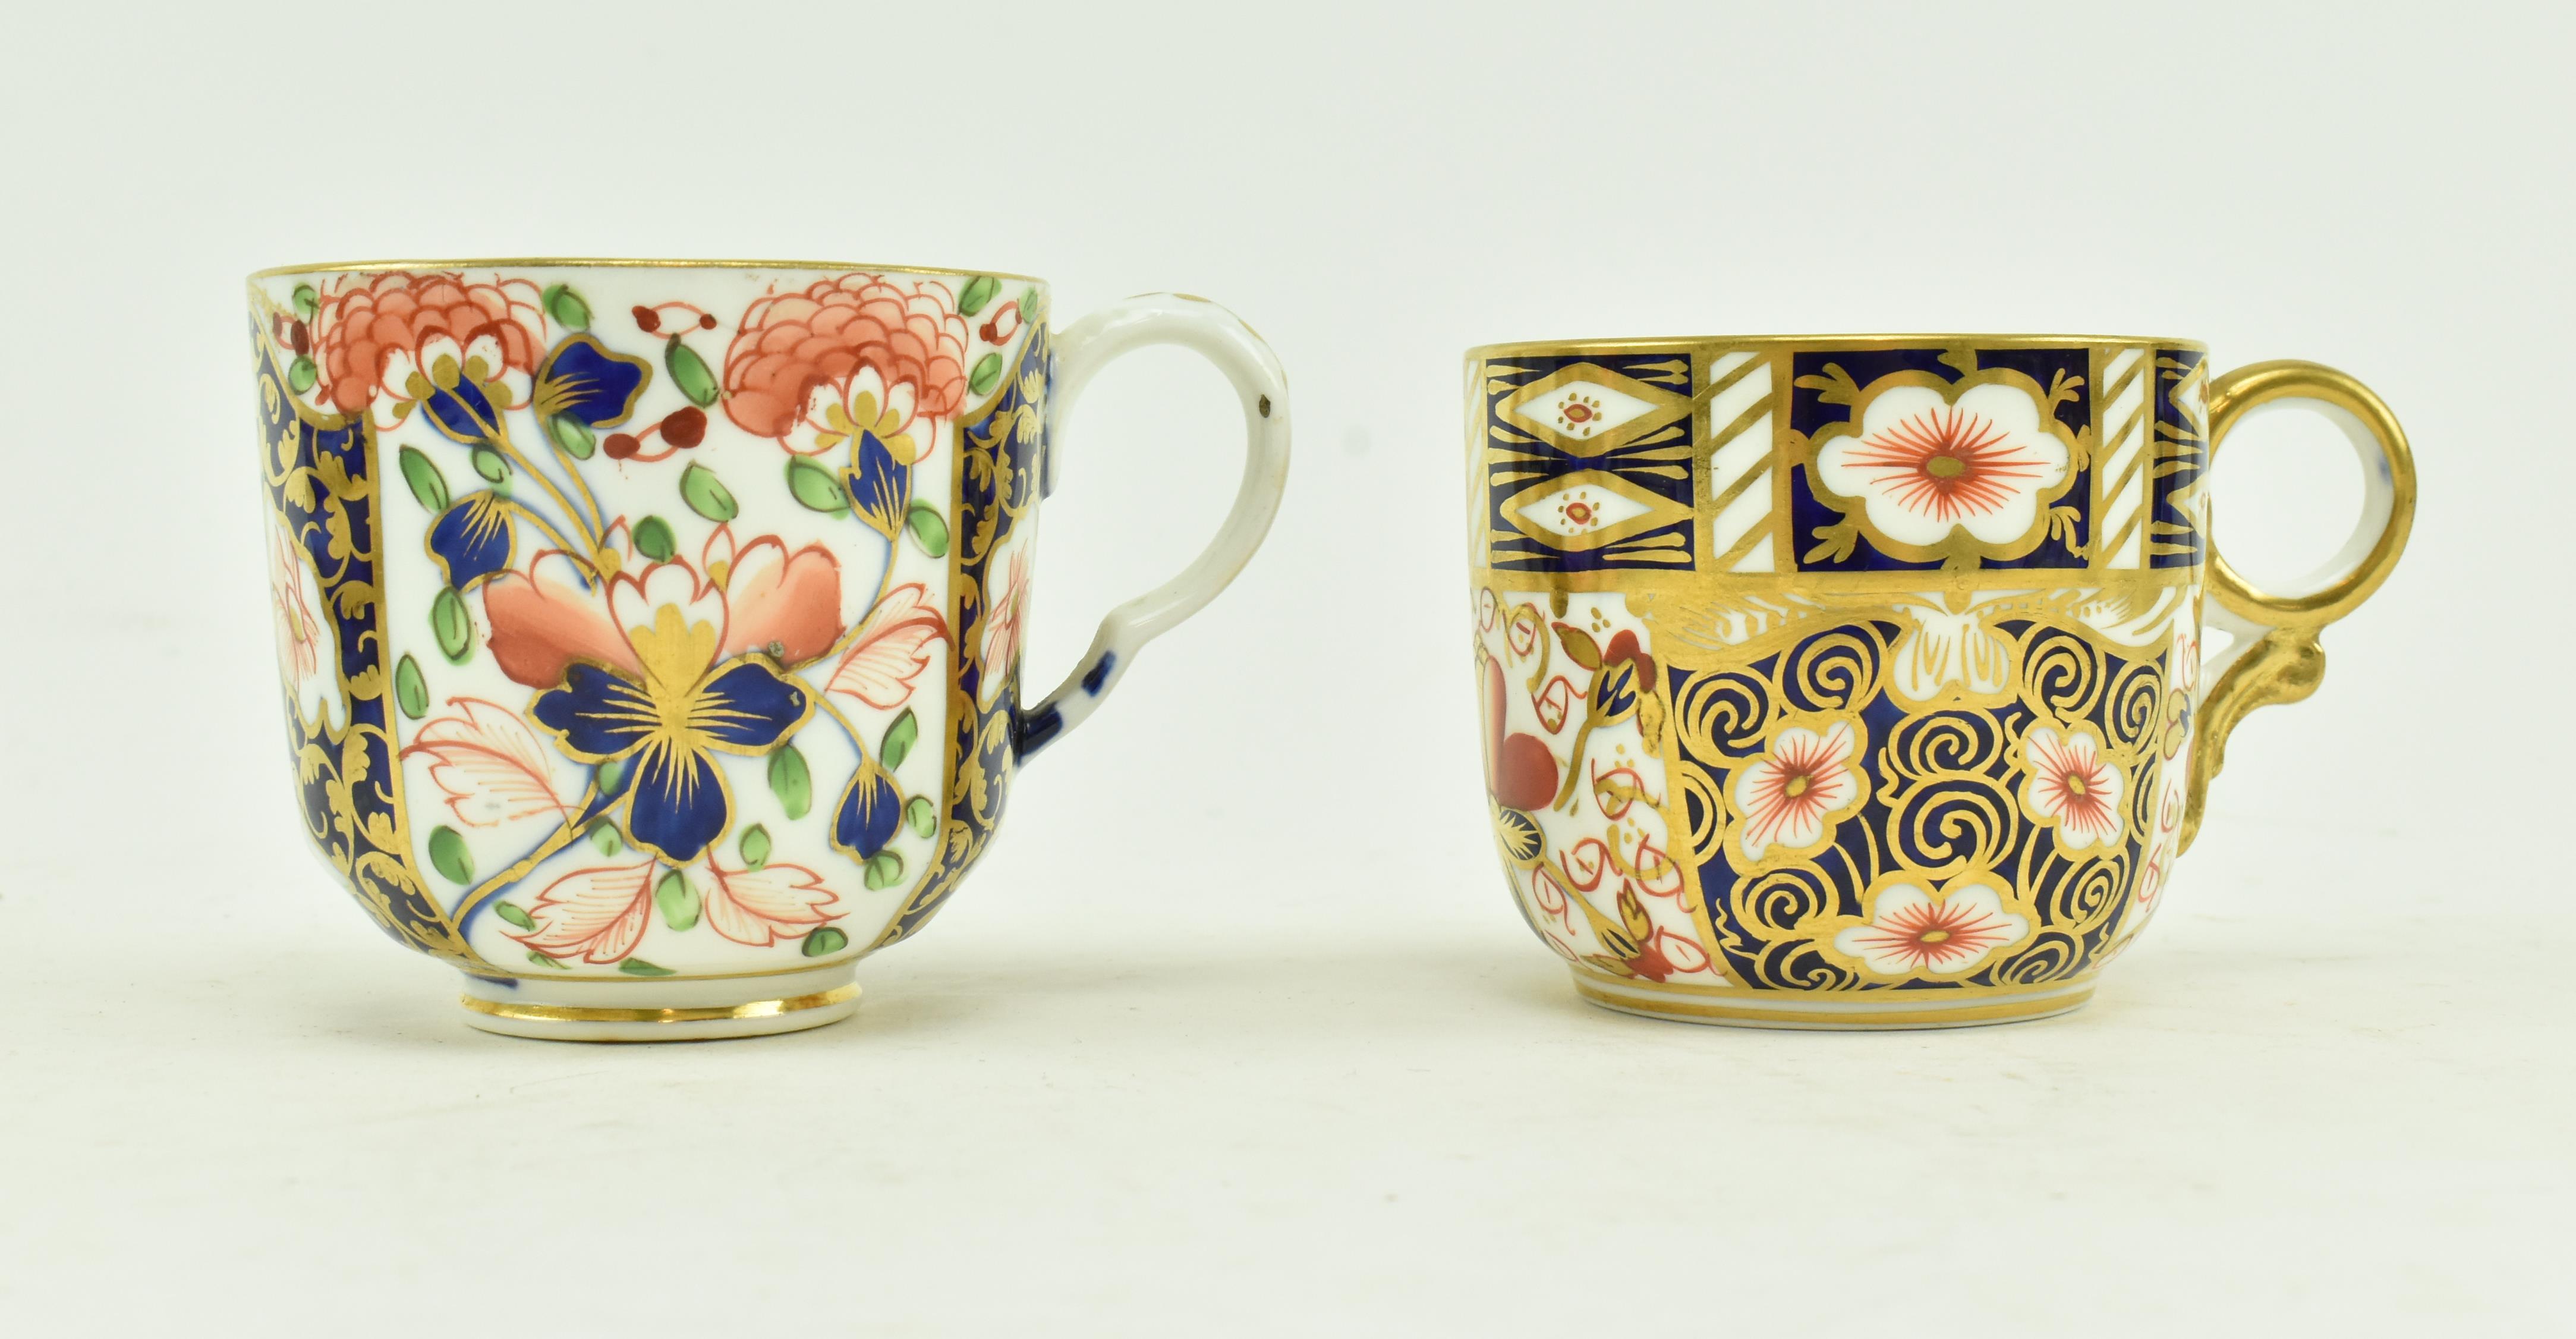 COLLECTION OF 19TH CENTURY PORCELAIN TEACUPS & SAUCERS - Image 9 of 13